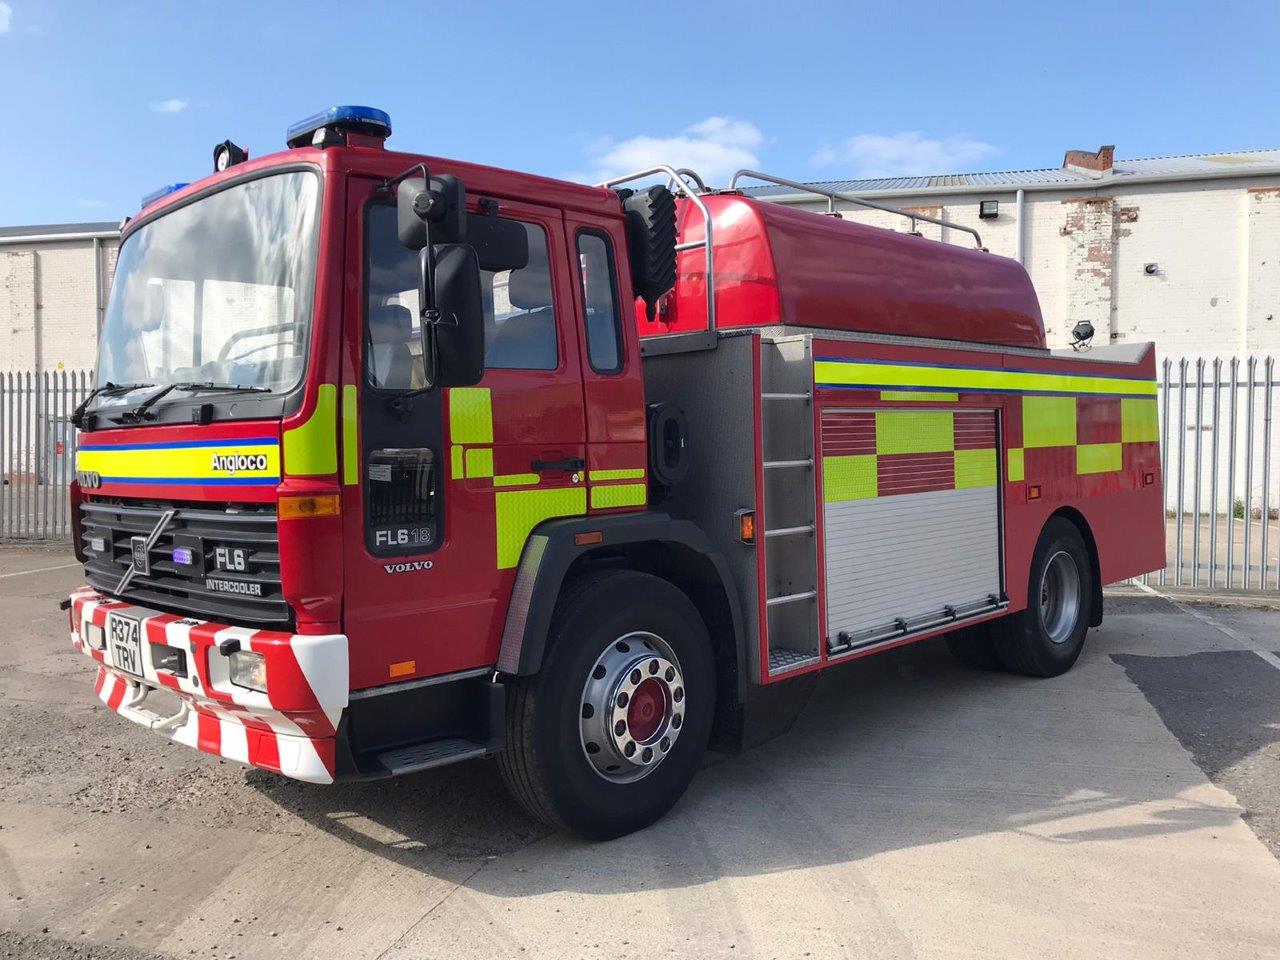 VOLVO FL6 250 Emergency Water Tanker (Fire Engine) - Govsales of ex military vehicles for sale, mod surplus